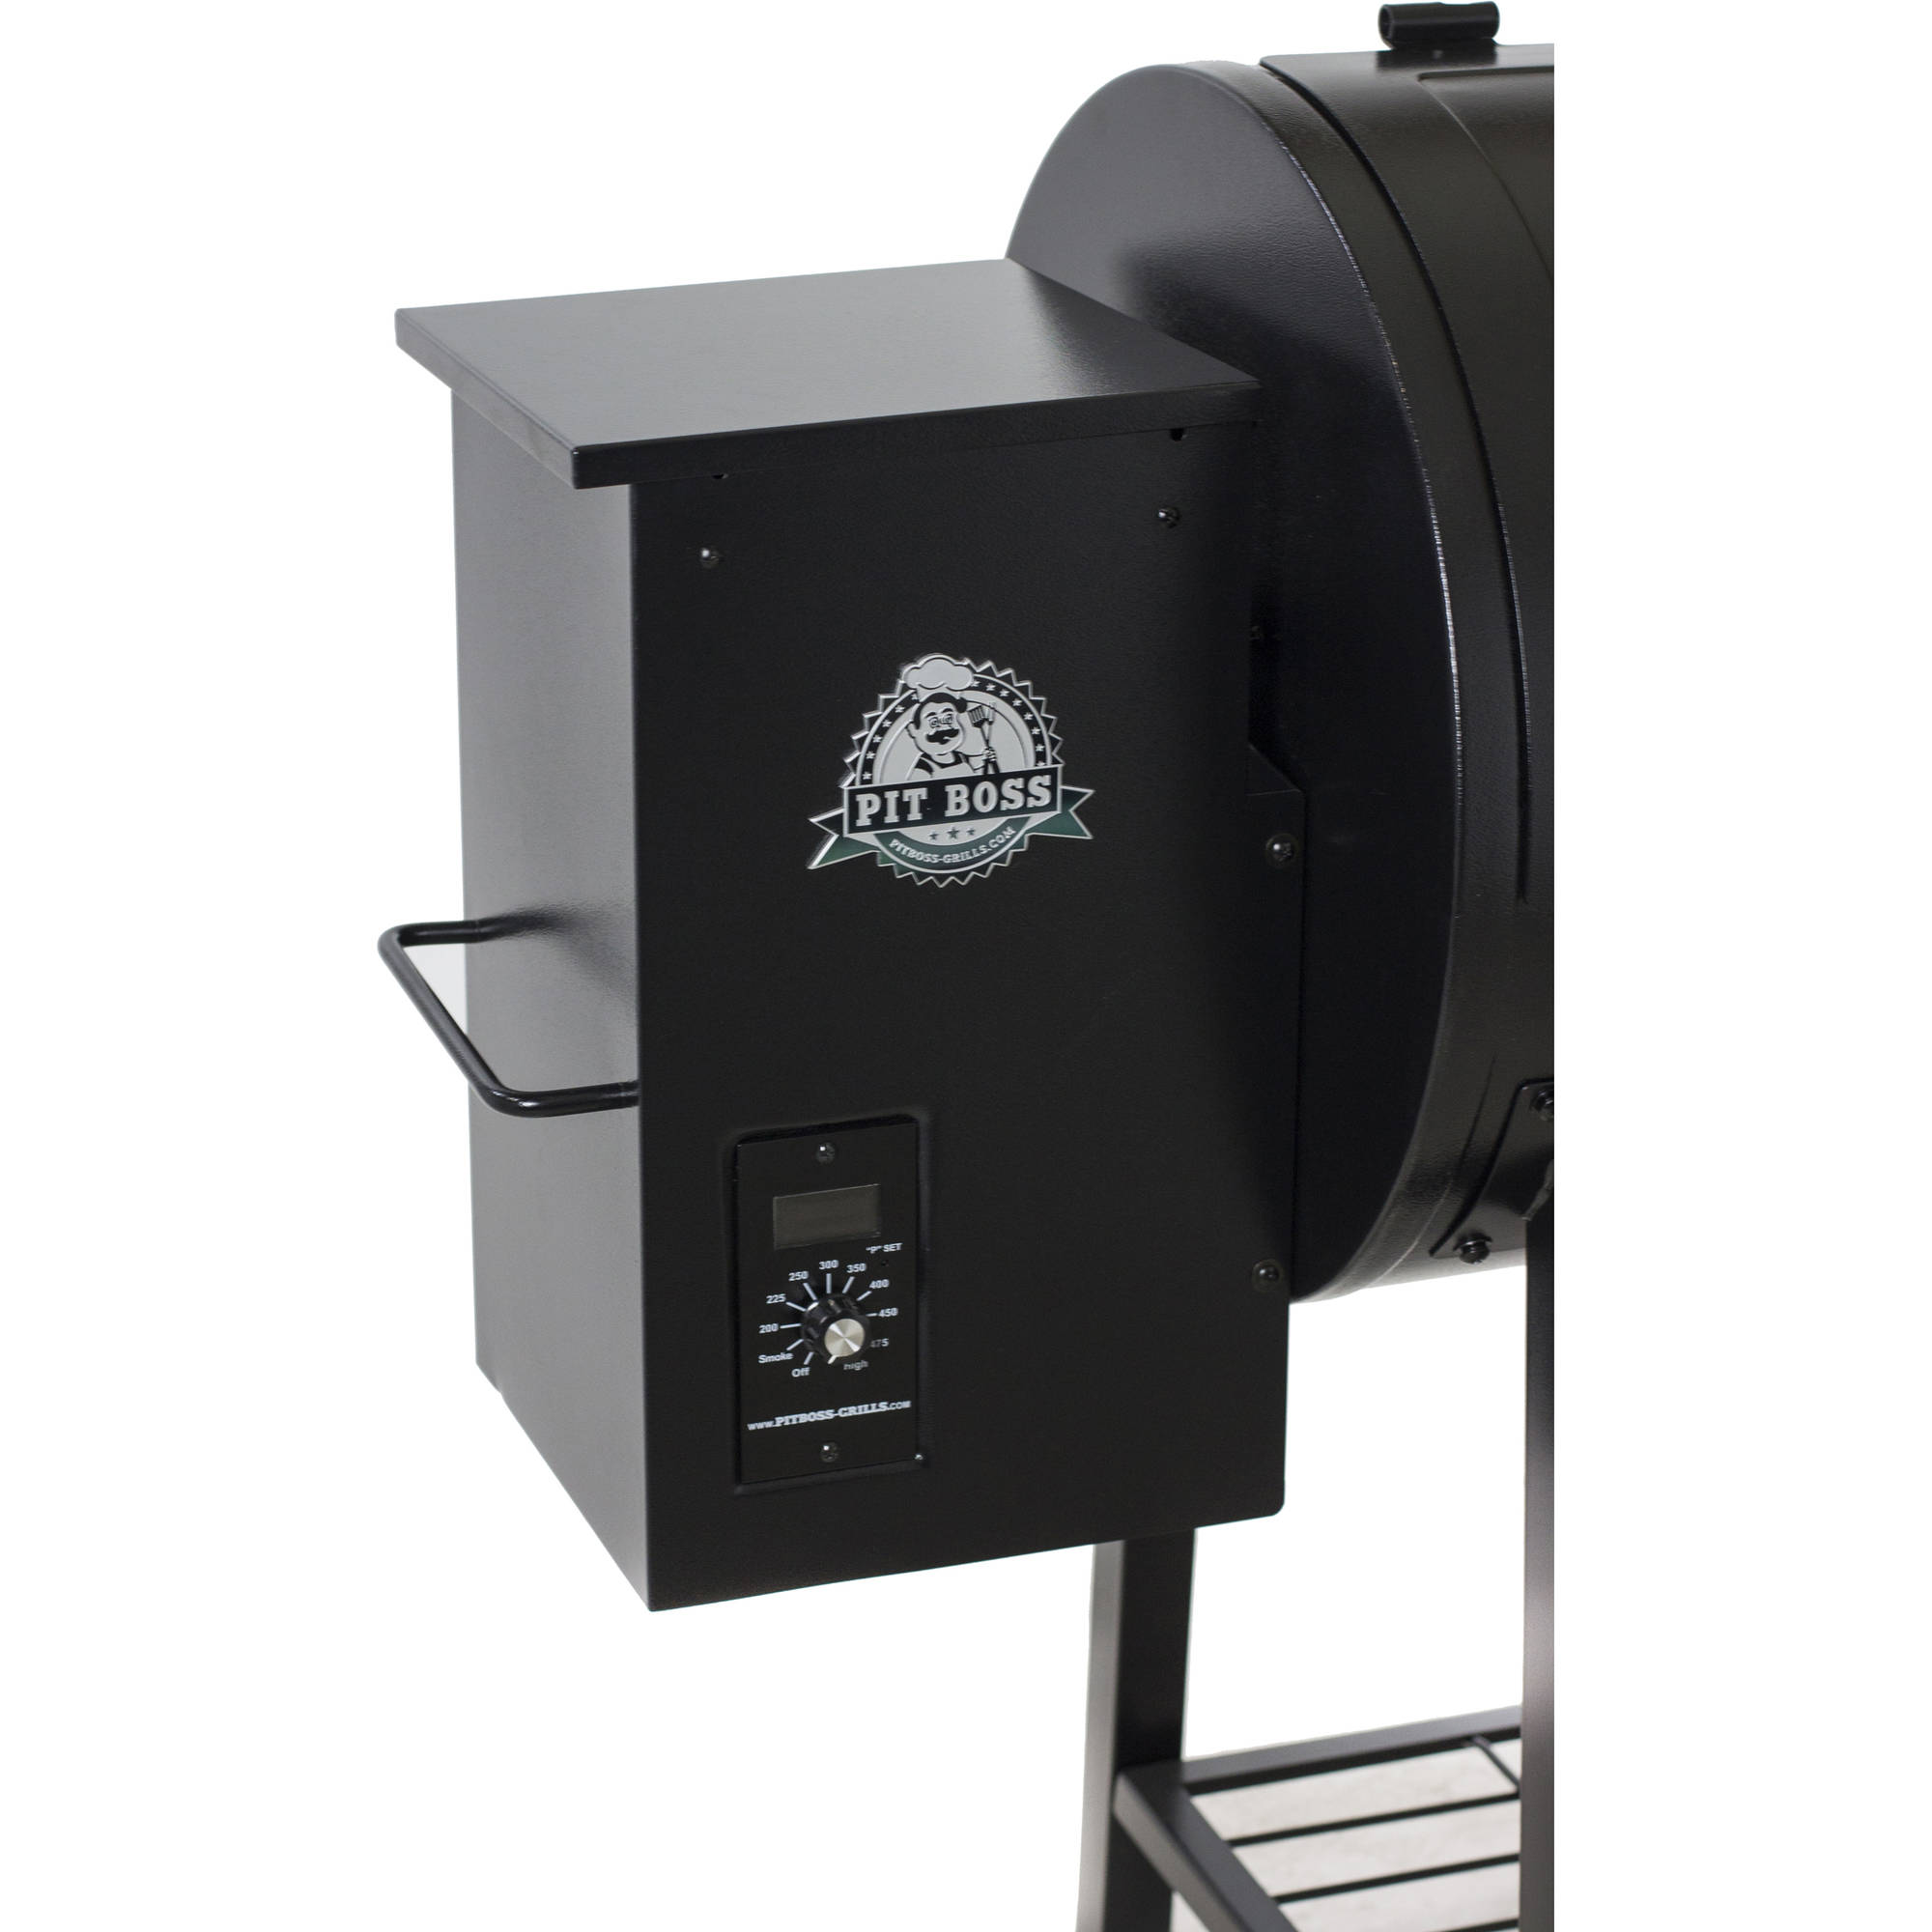 Pit Boss 700FB Wood Fired Pellet Grill with Flame Broiler, 700 Sq. In. Cooking Space - image 4 of 11